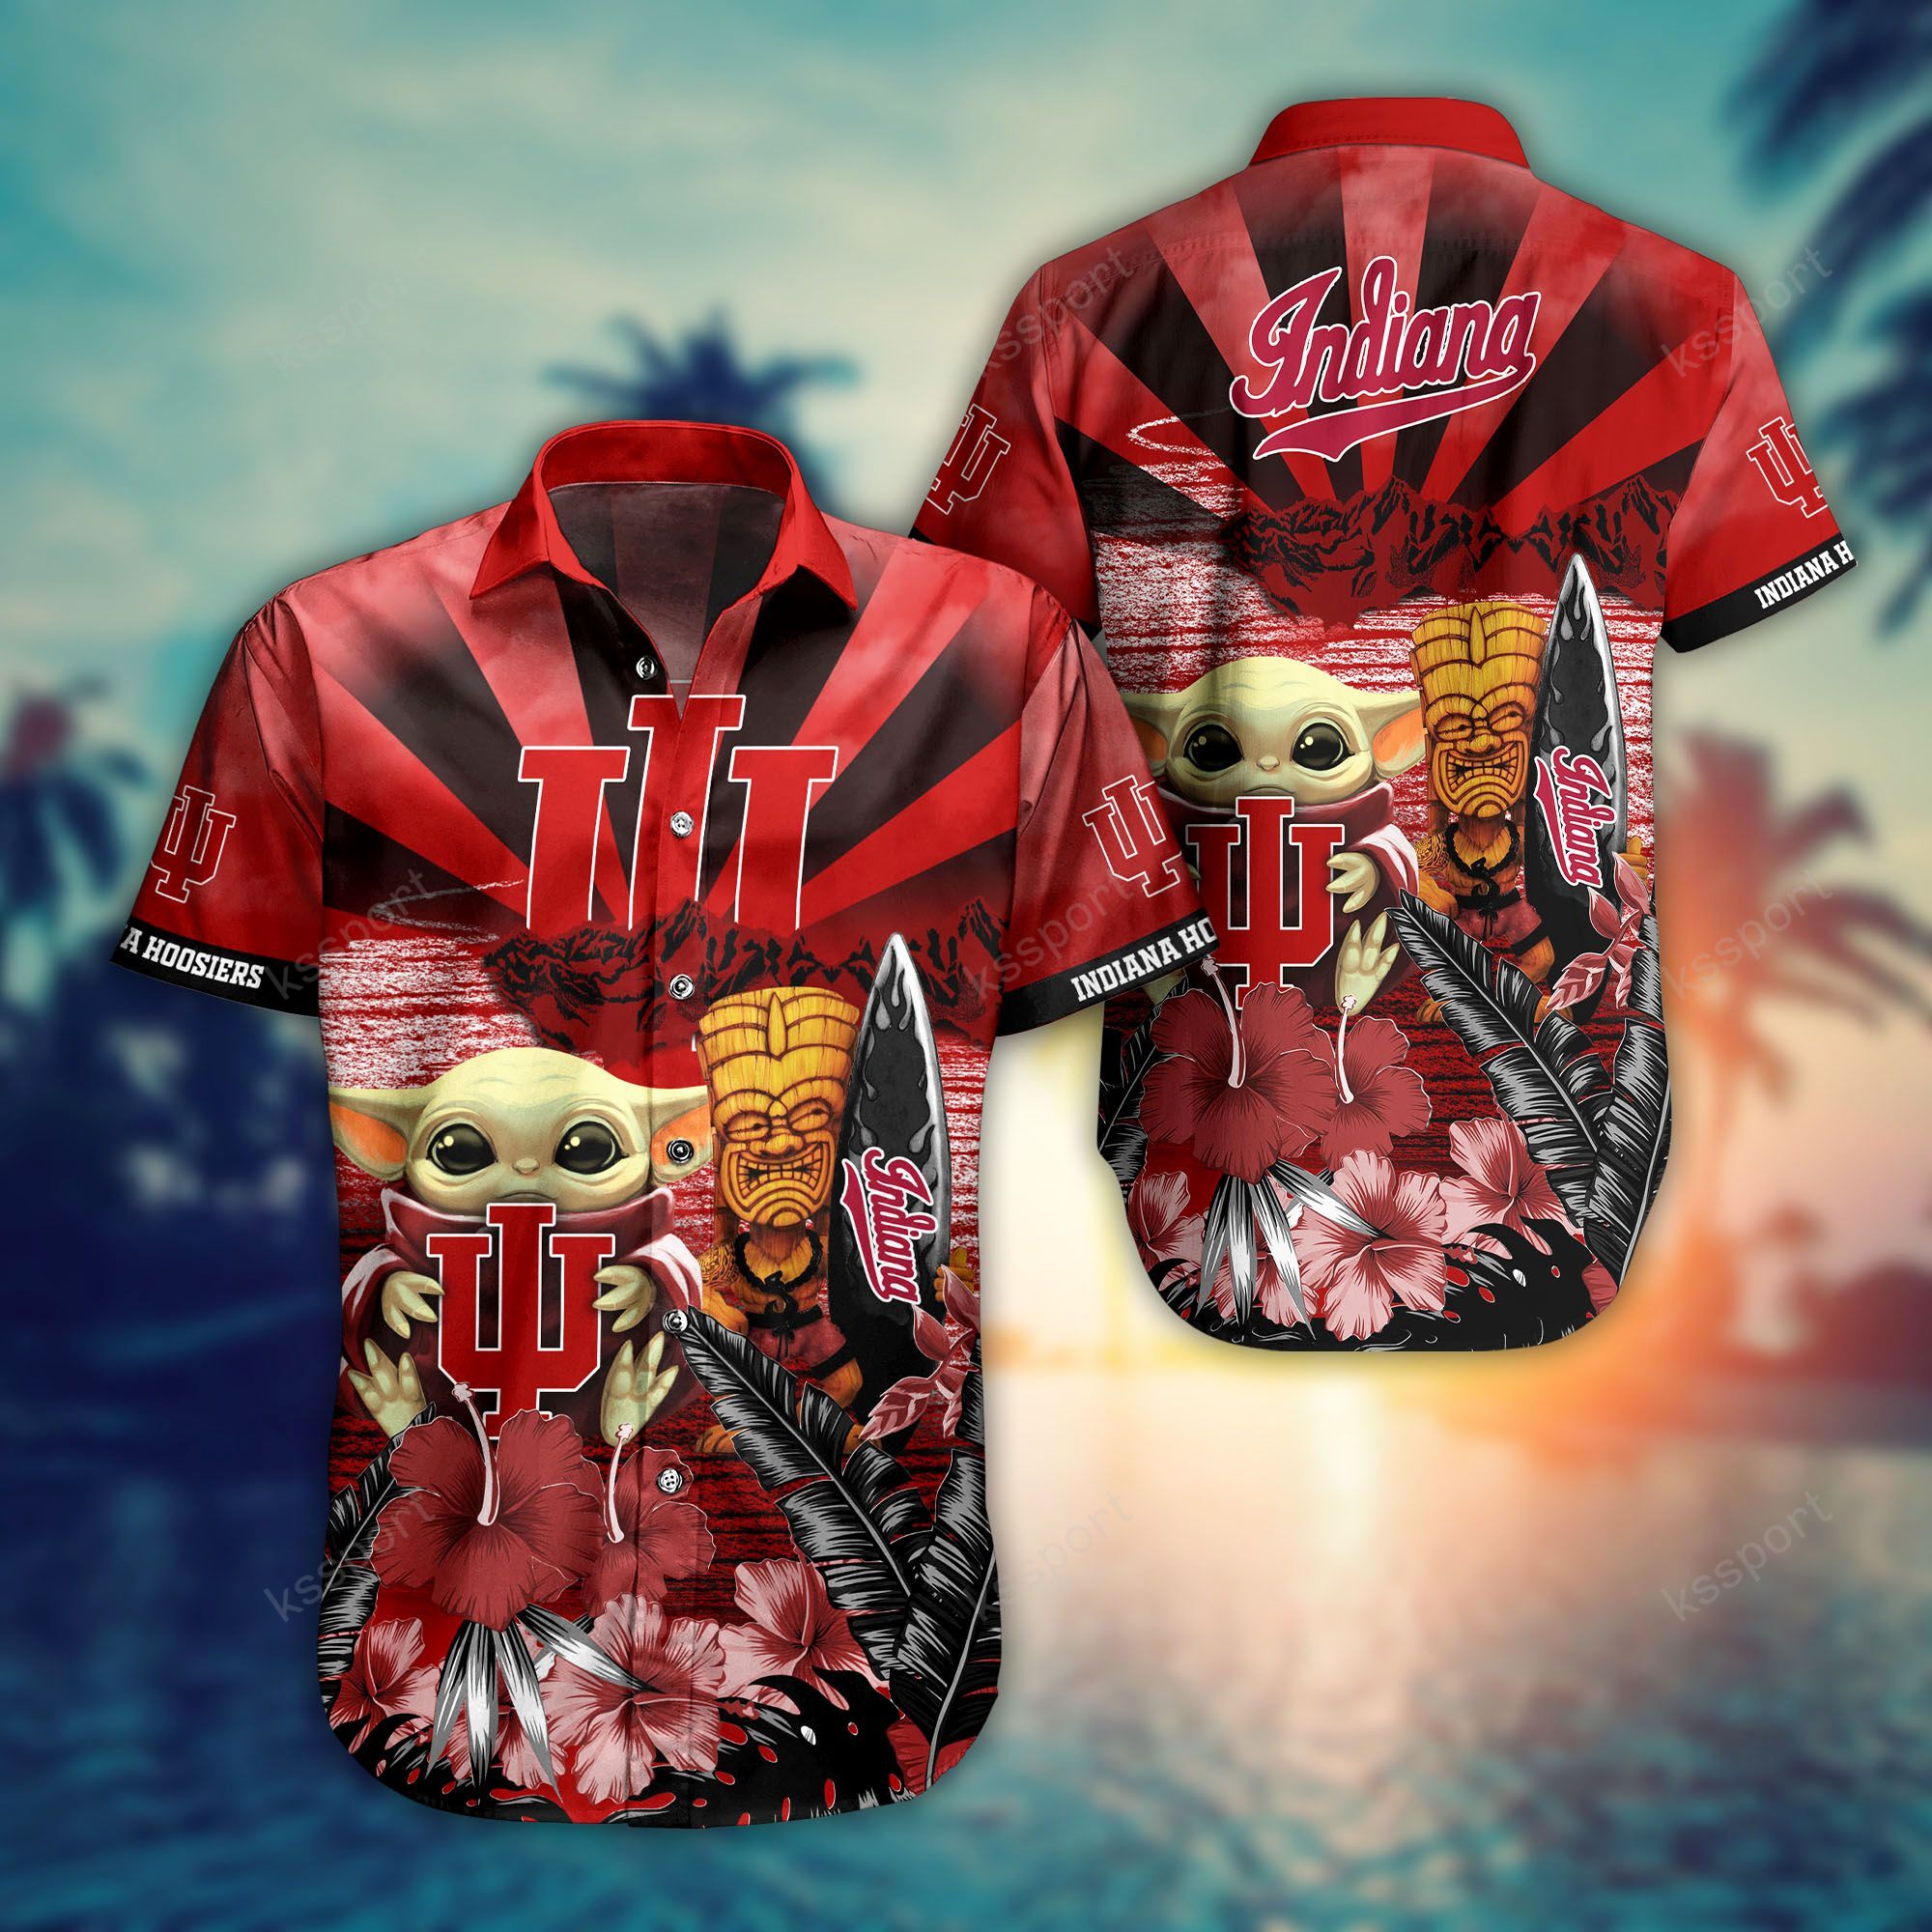 Choose a Hawaiian shirt that suitable for your shorts 43